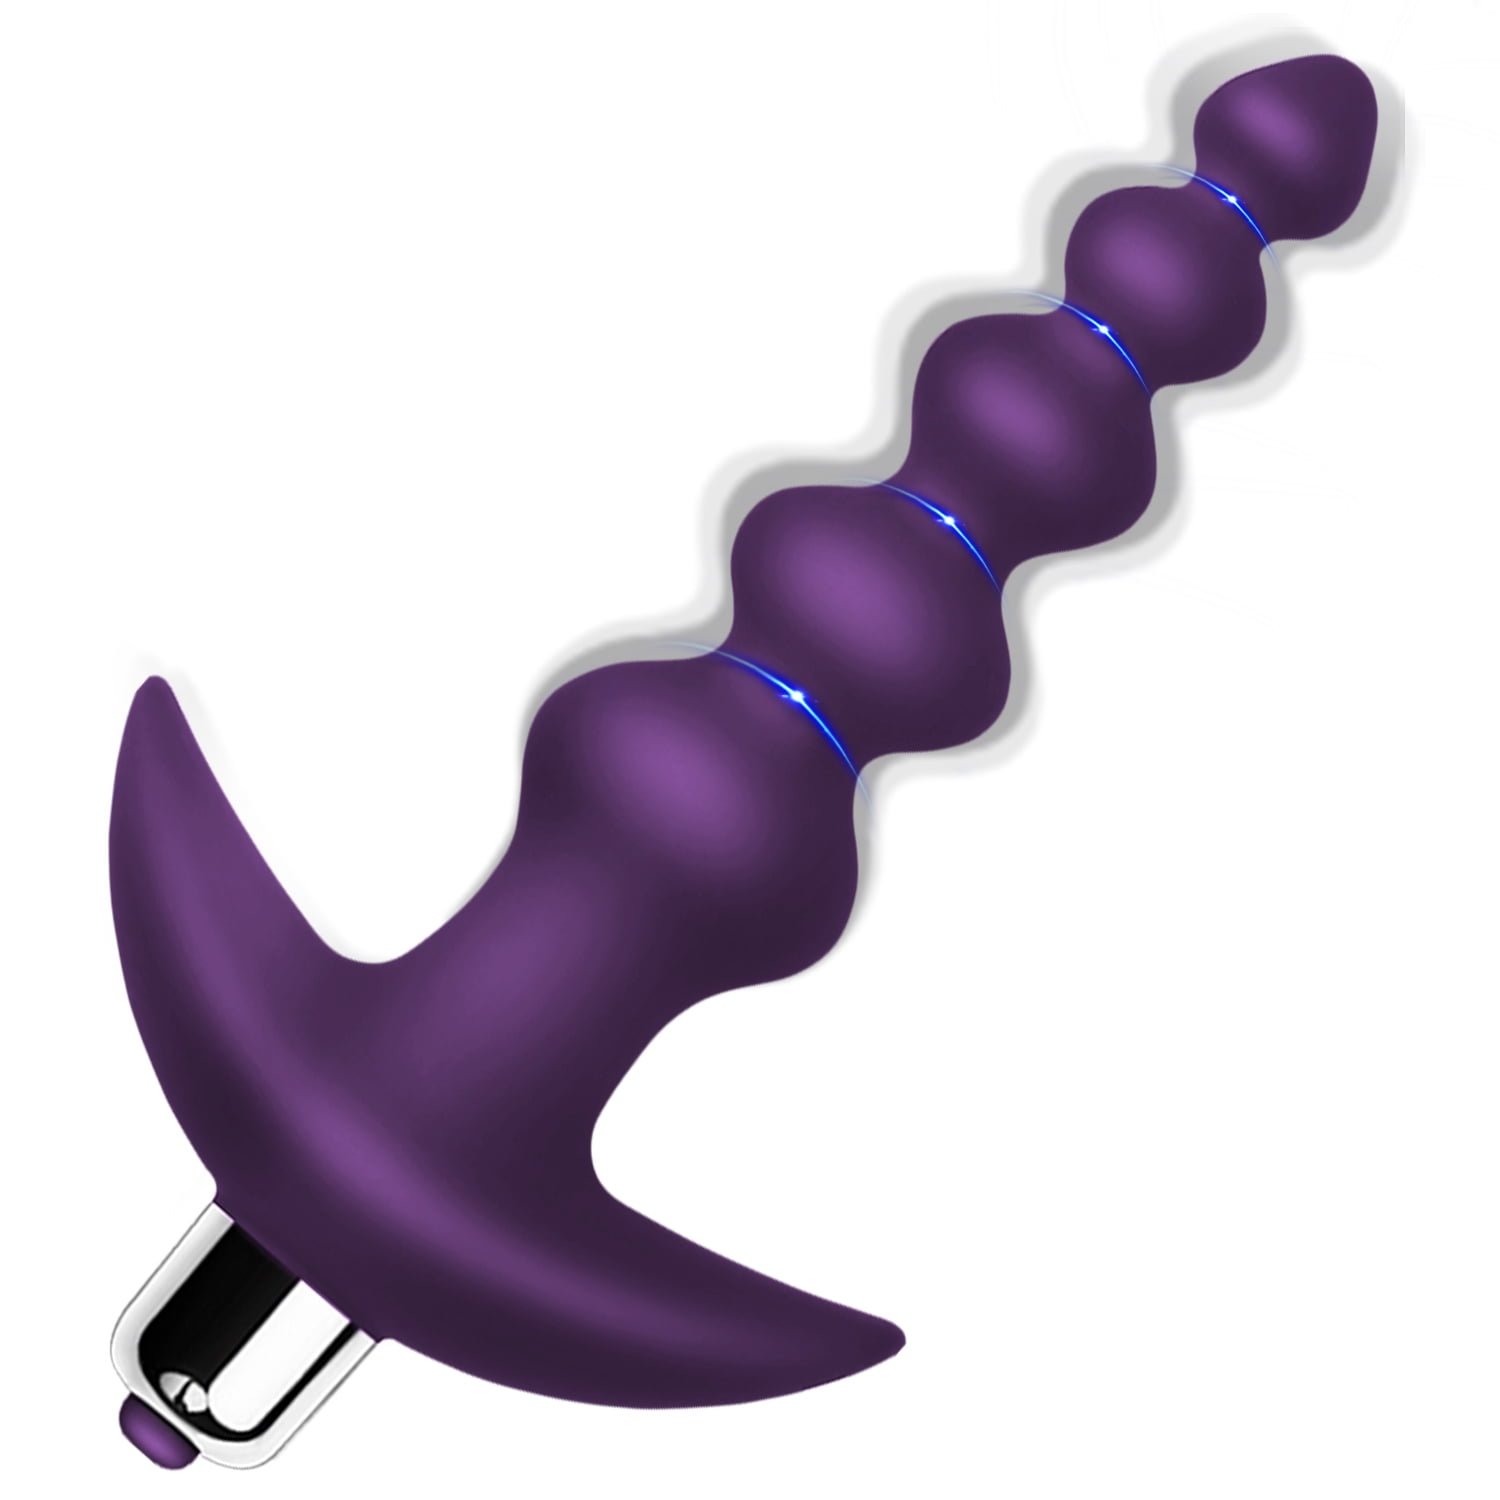 Areskey Anal Beads Toy,Vibrating Anal Beads Butt Plug with 16 Vibration Modes Graduated Design Anal Sex Toy for Men, Women and Couples(Purple)